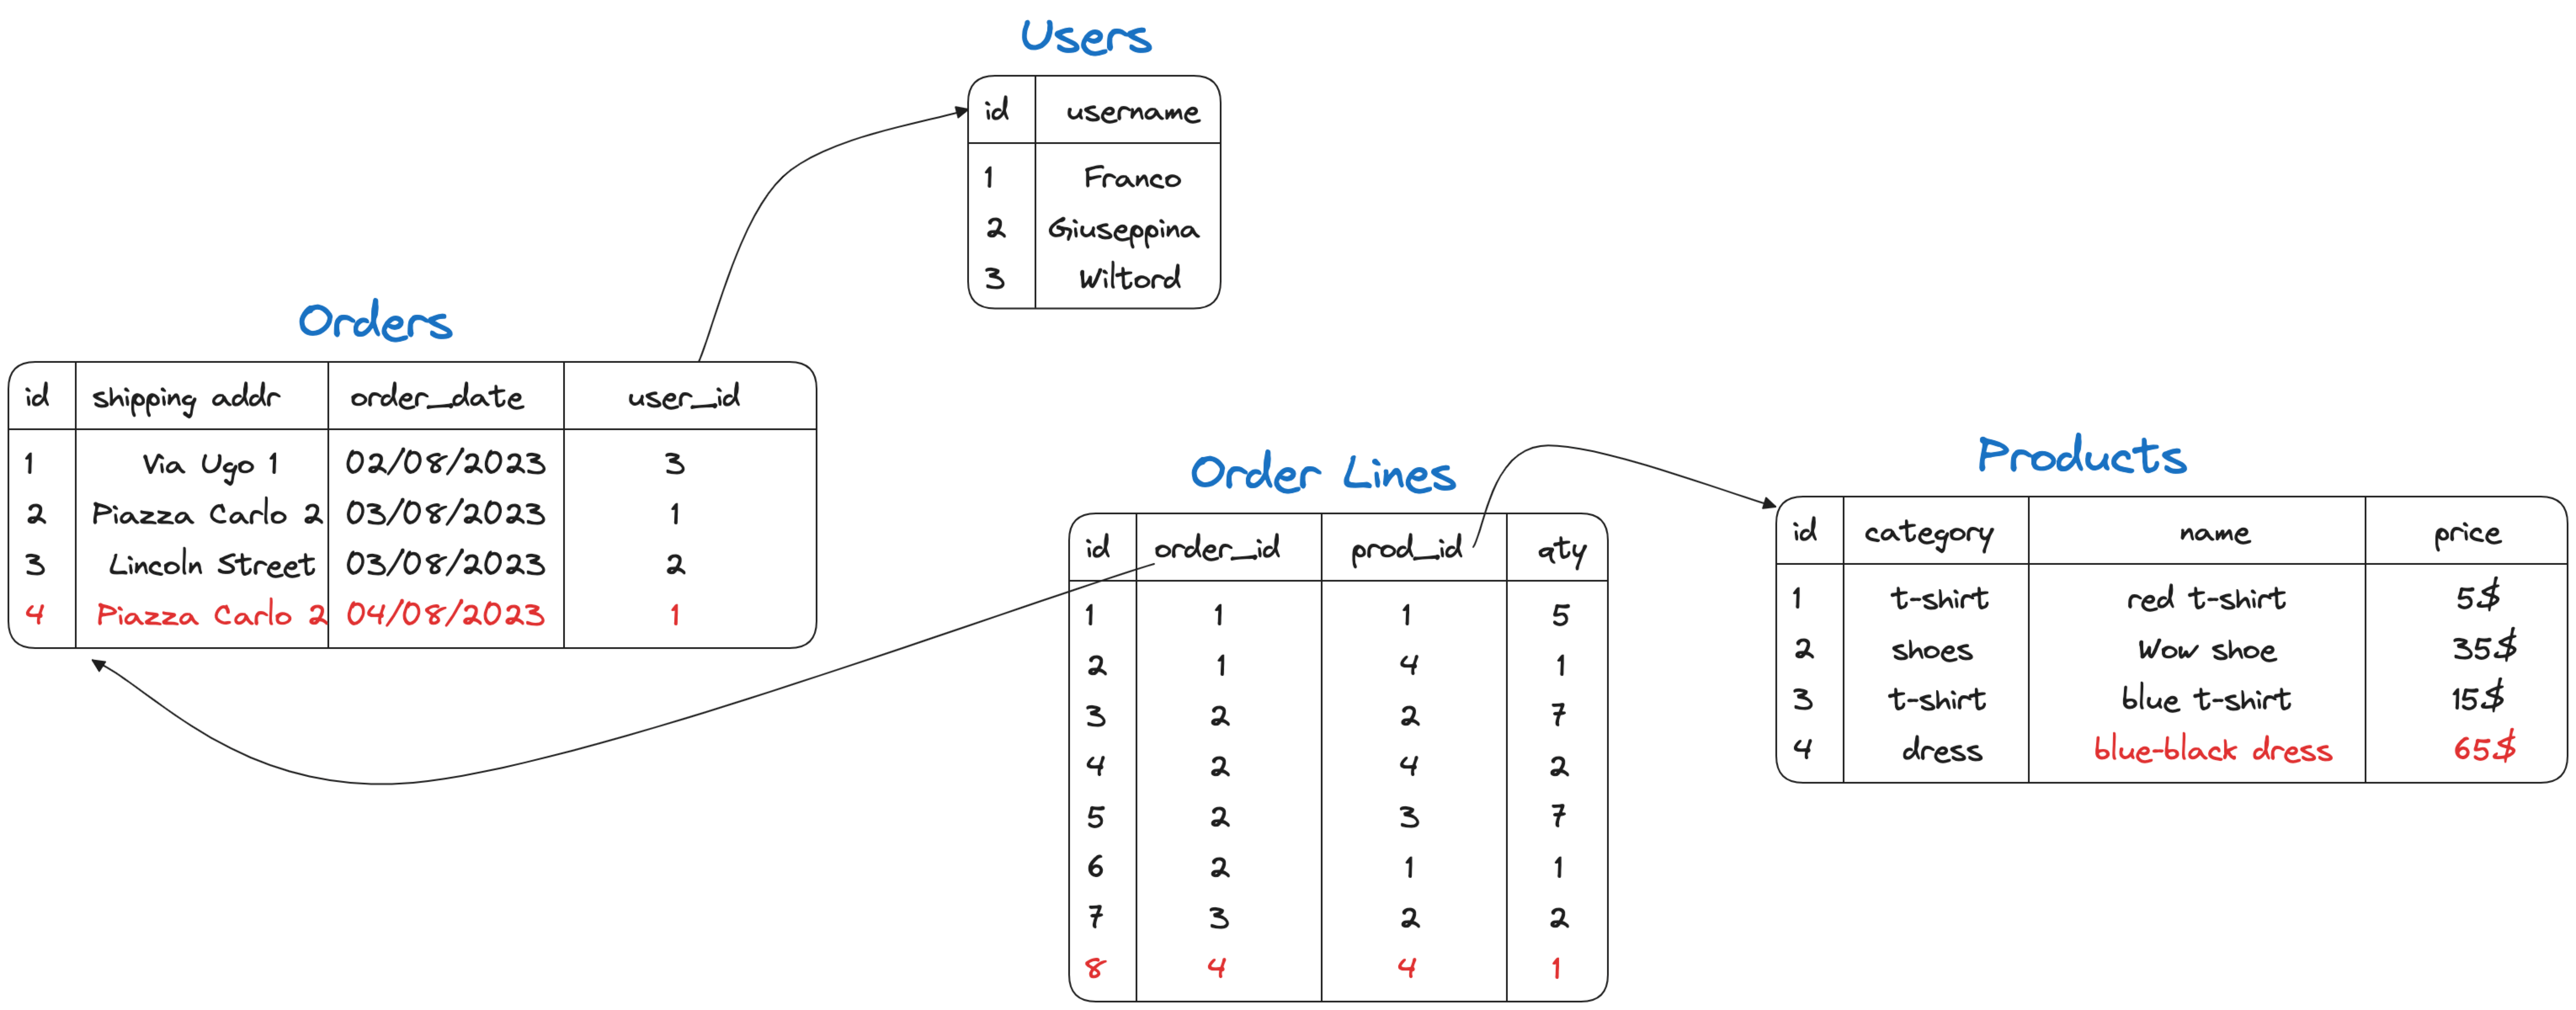 Entity relationship model with the updates to the order, order-lines and products table